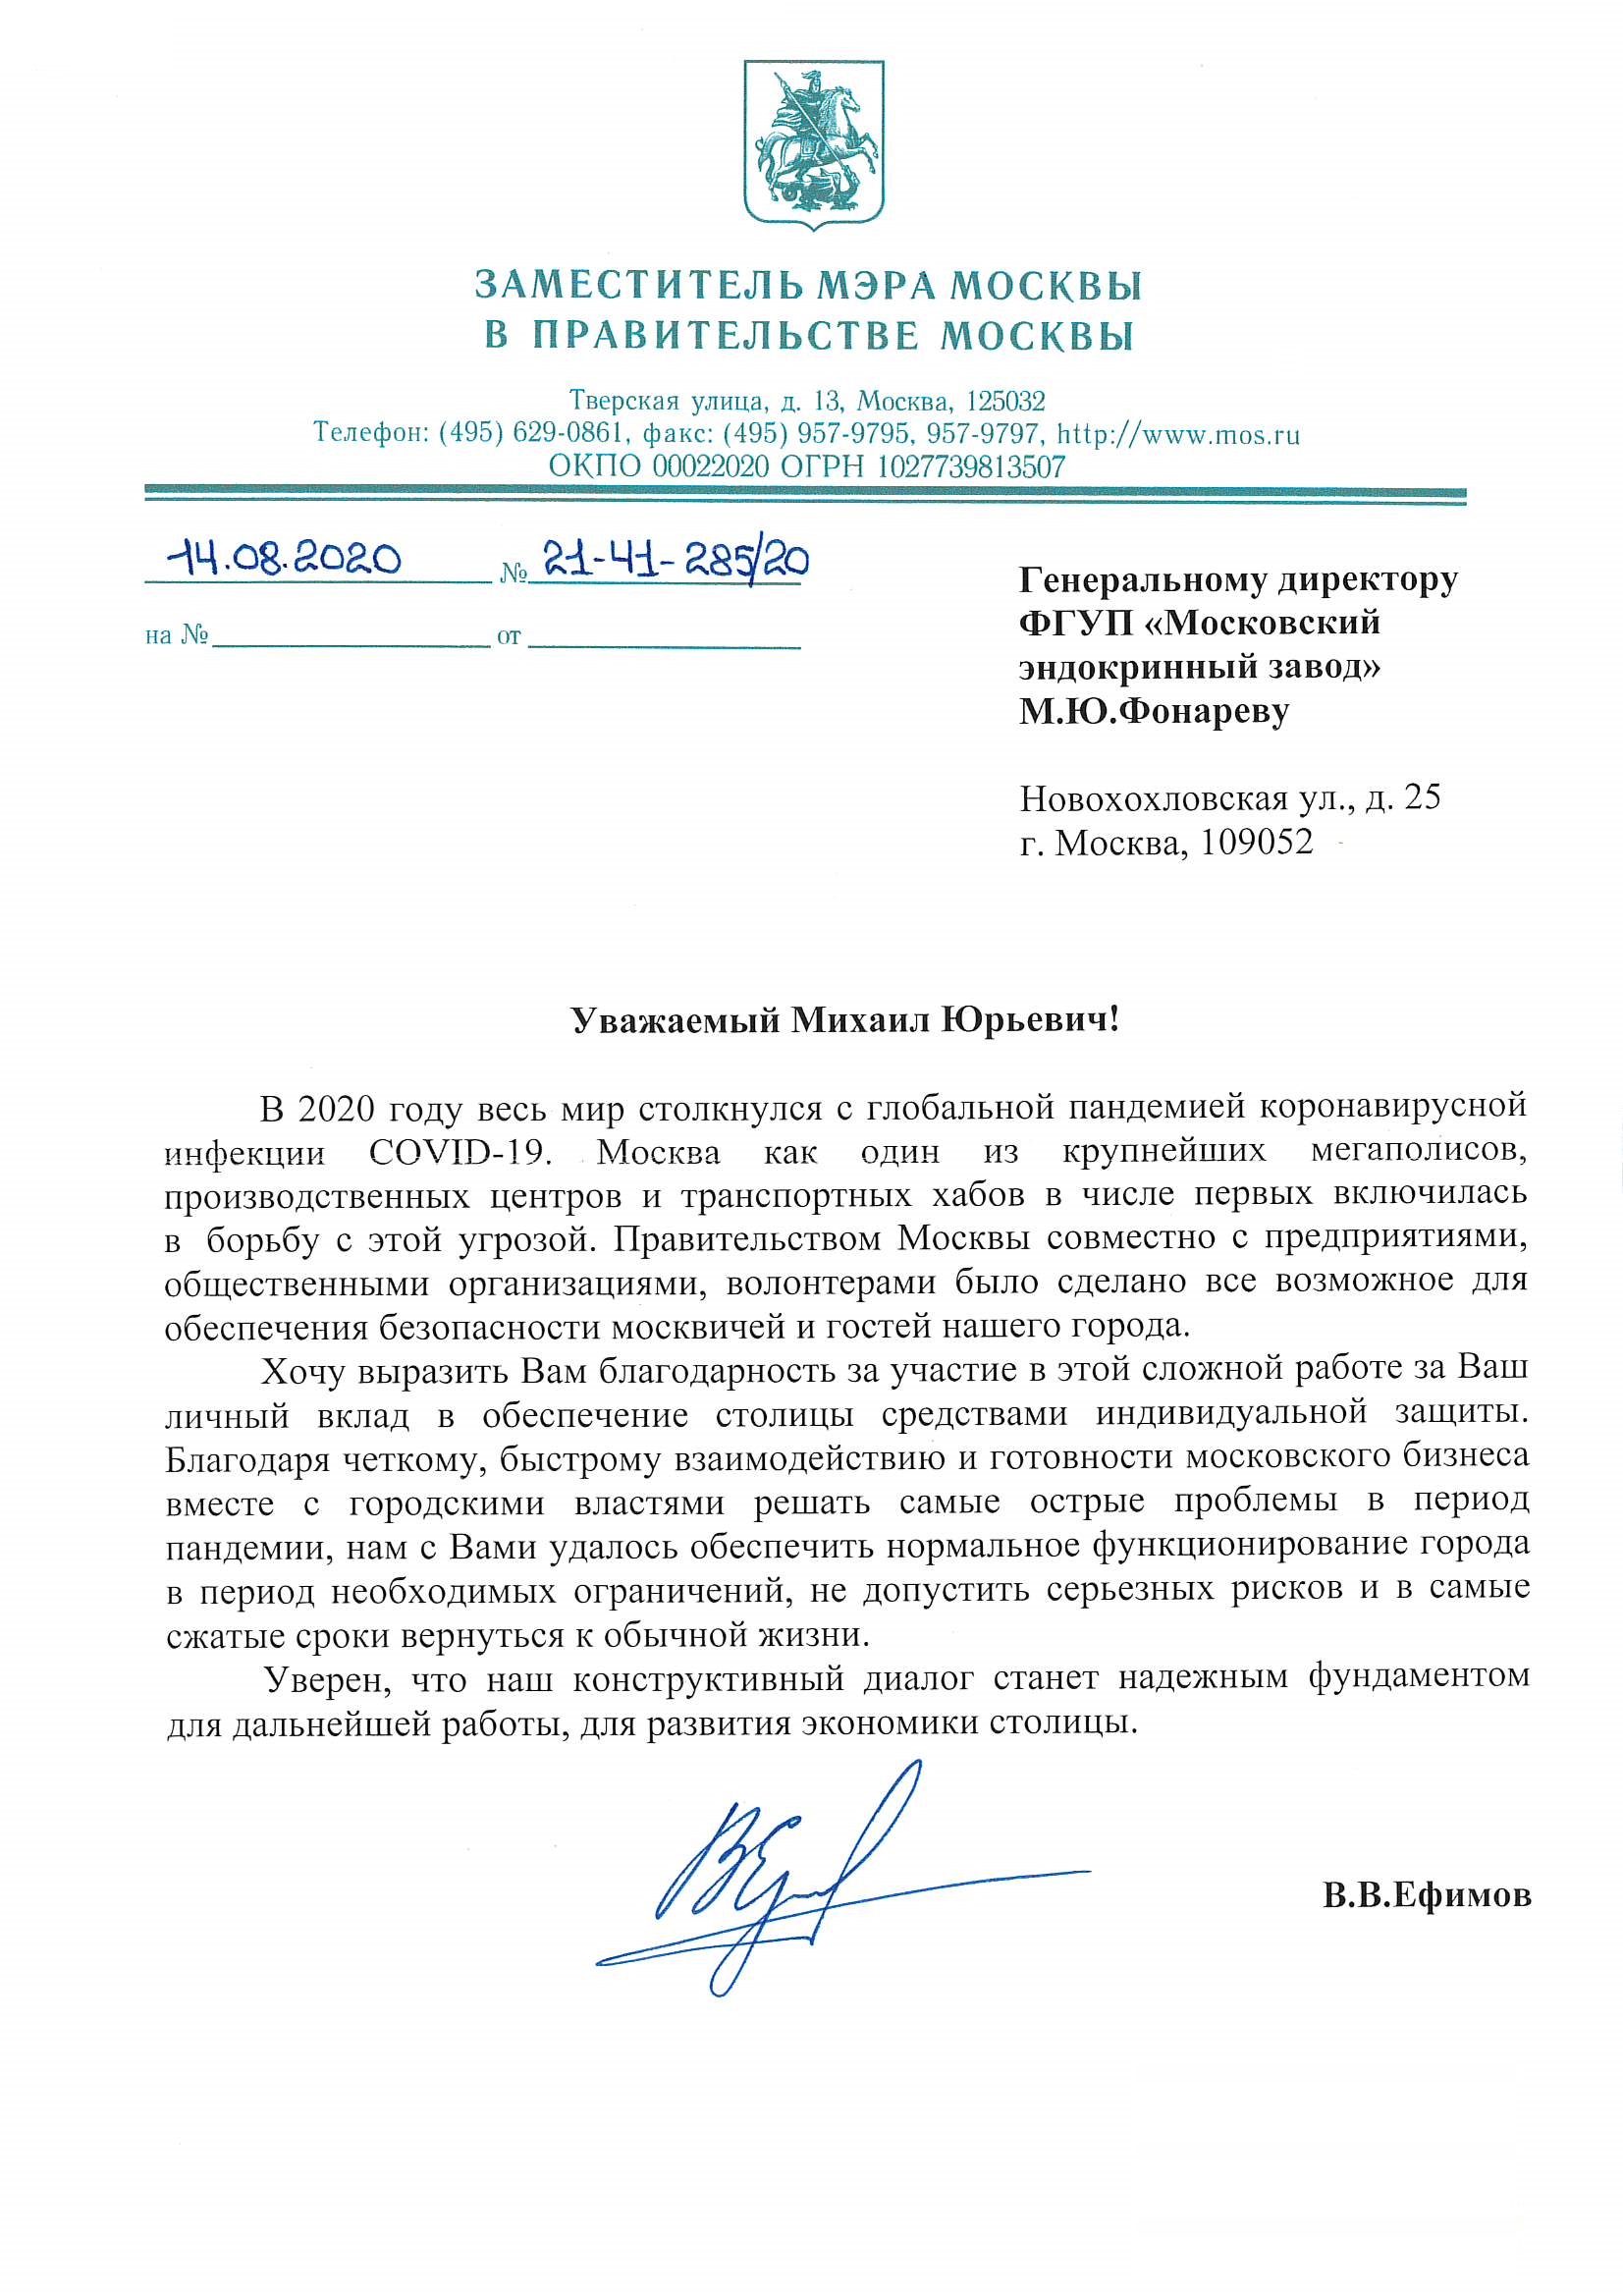 The Moscow government expressed its gratitude to the staff of the Moscow endocrine plant for their personal contribution to providing the capital with personal protective equipment.